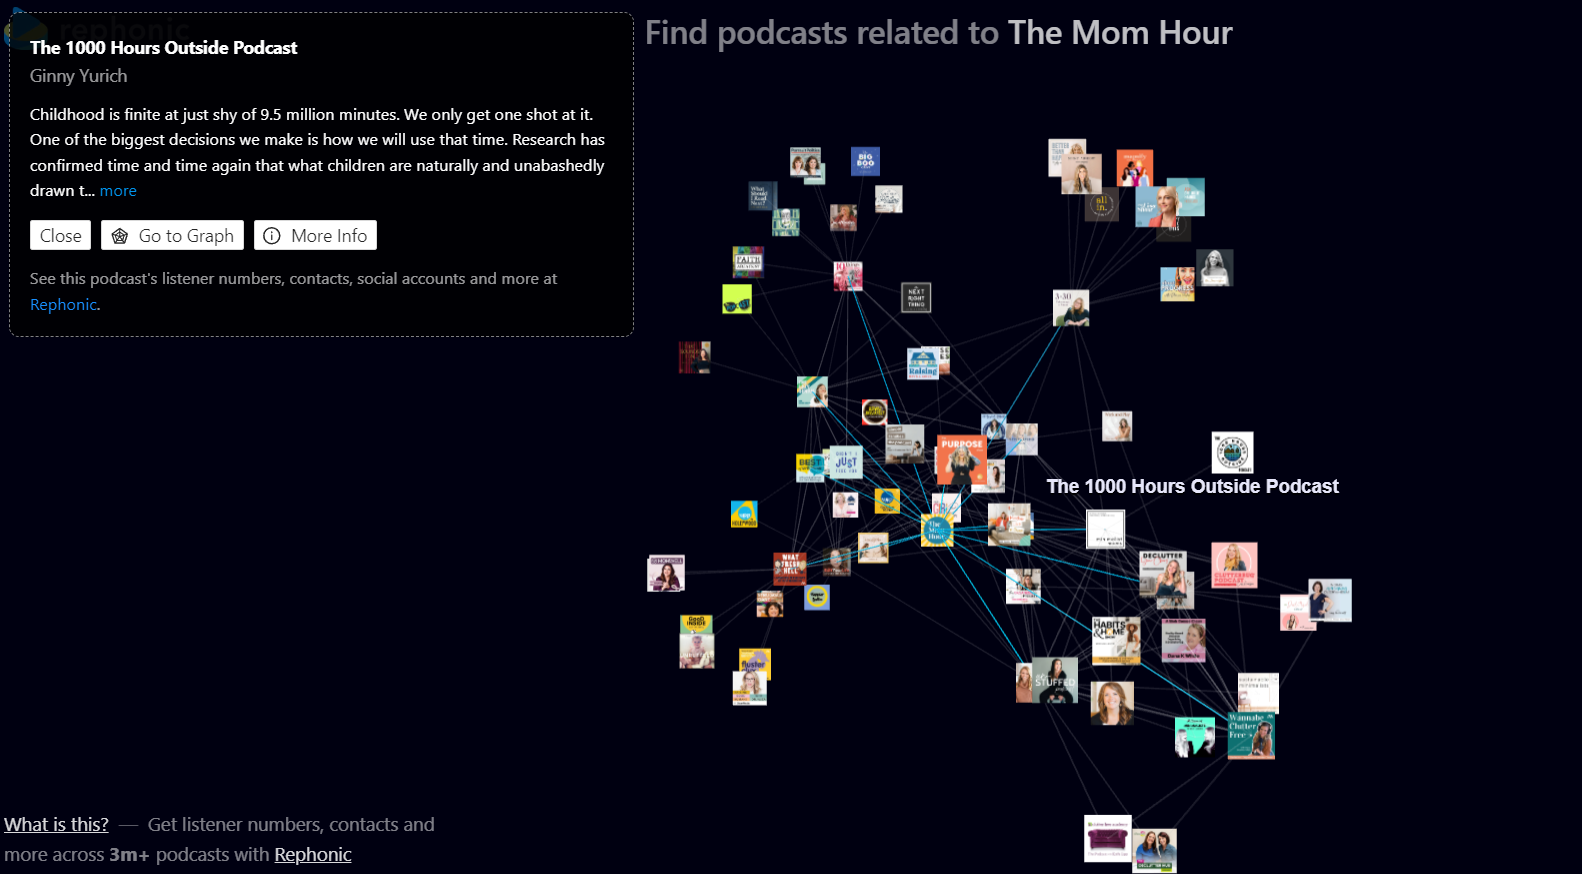 3D graphs Black background, spiders-web of tiny podcast icons all connected to the Mom Hour podcast. 